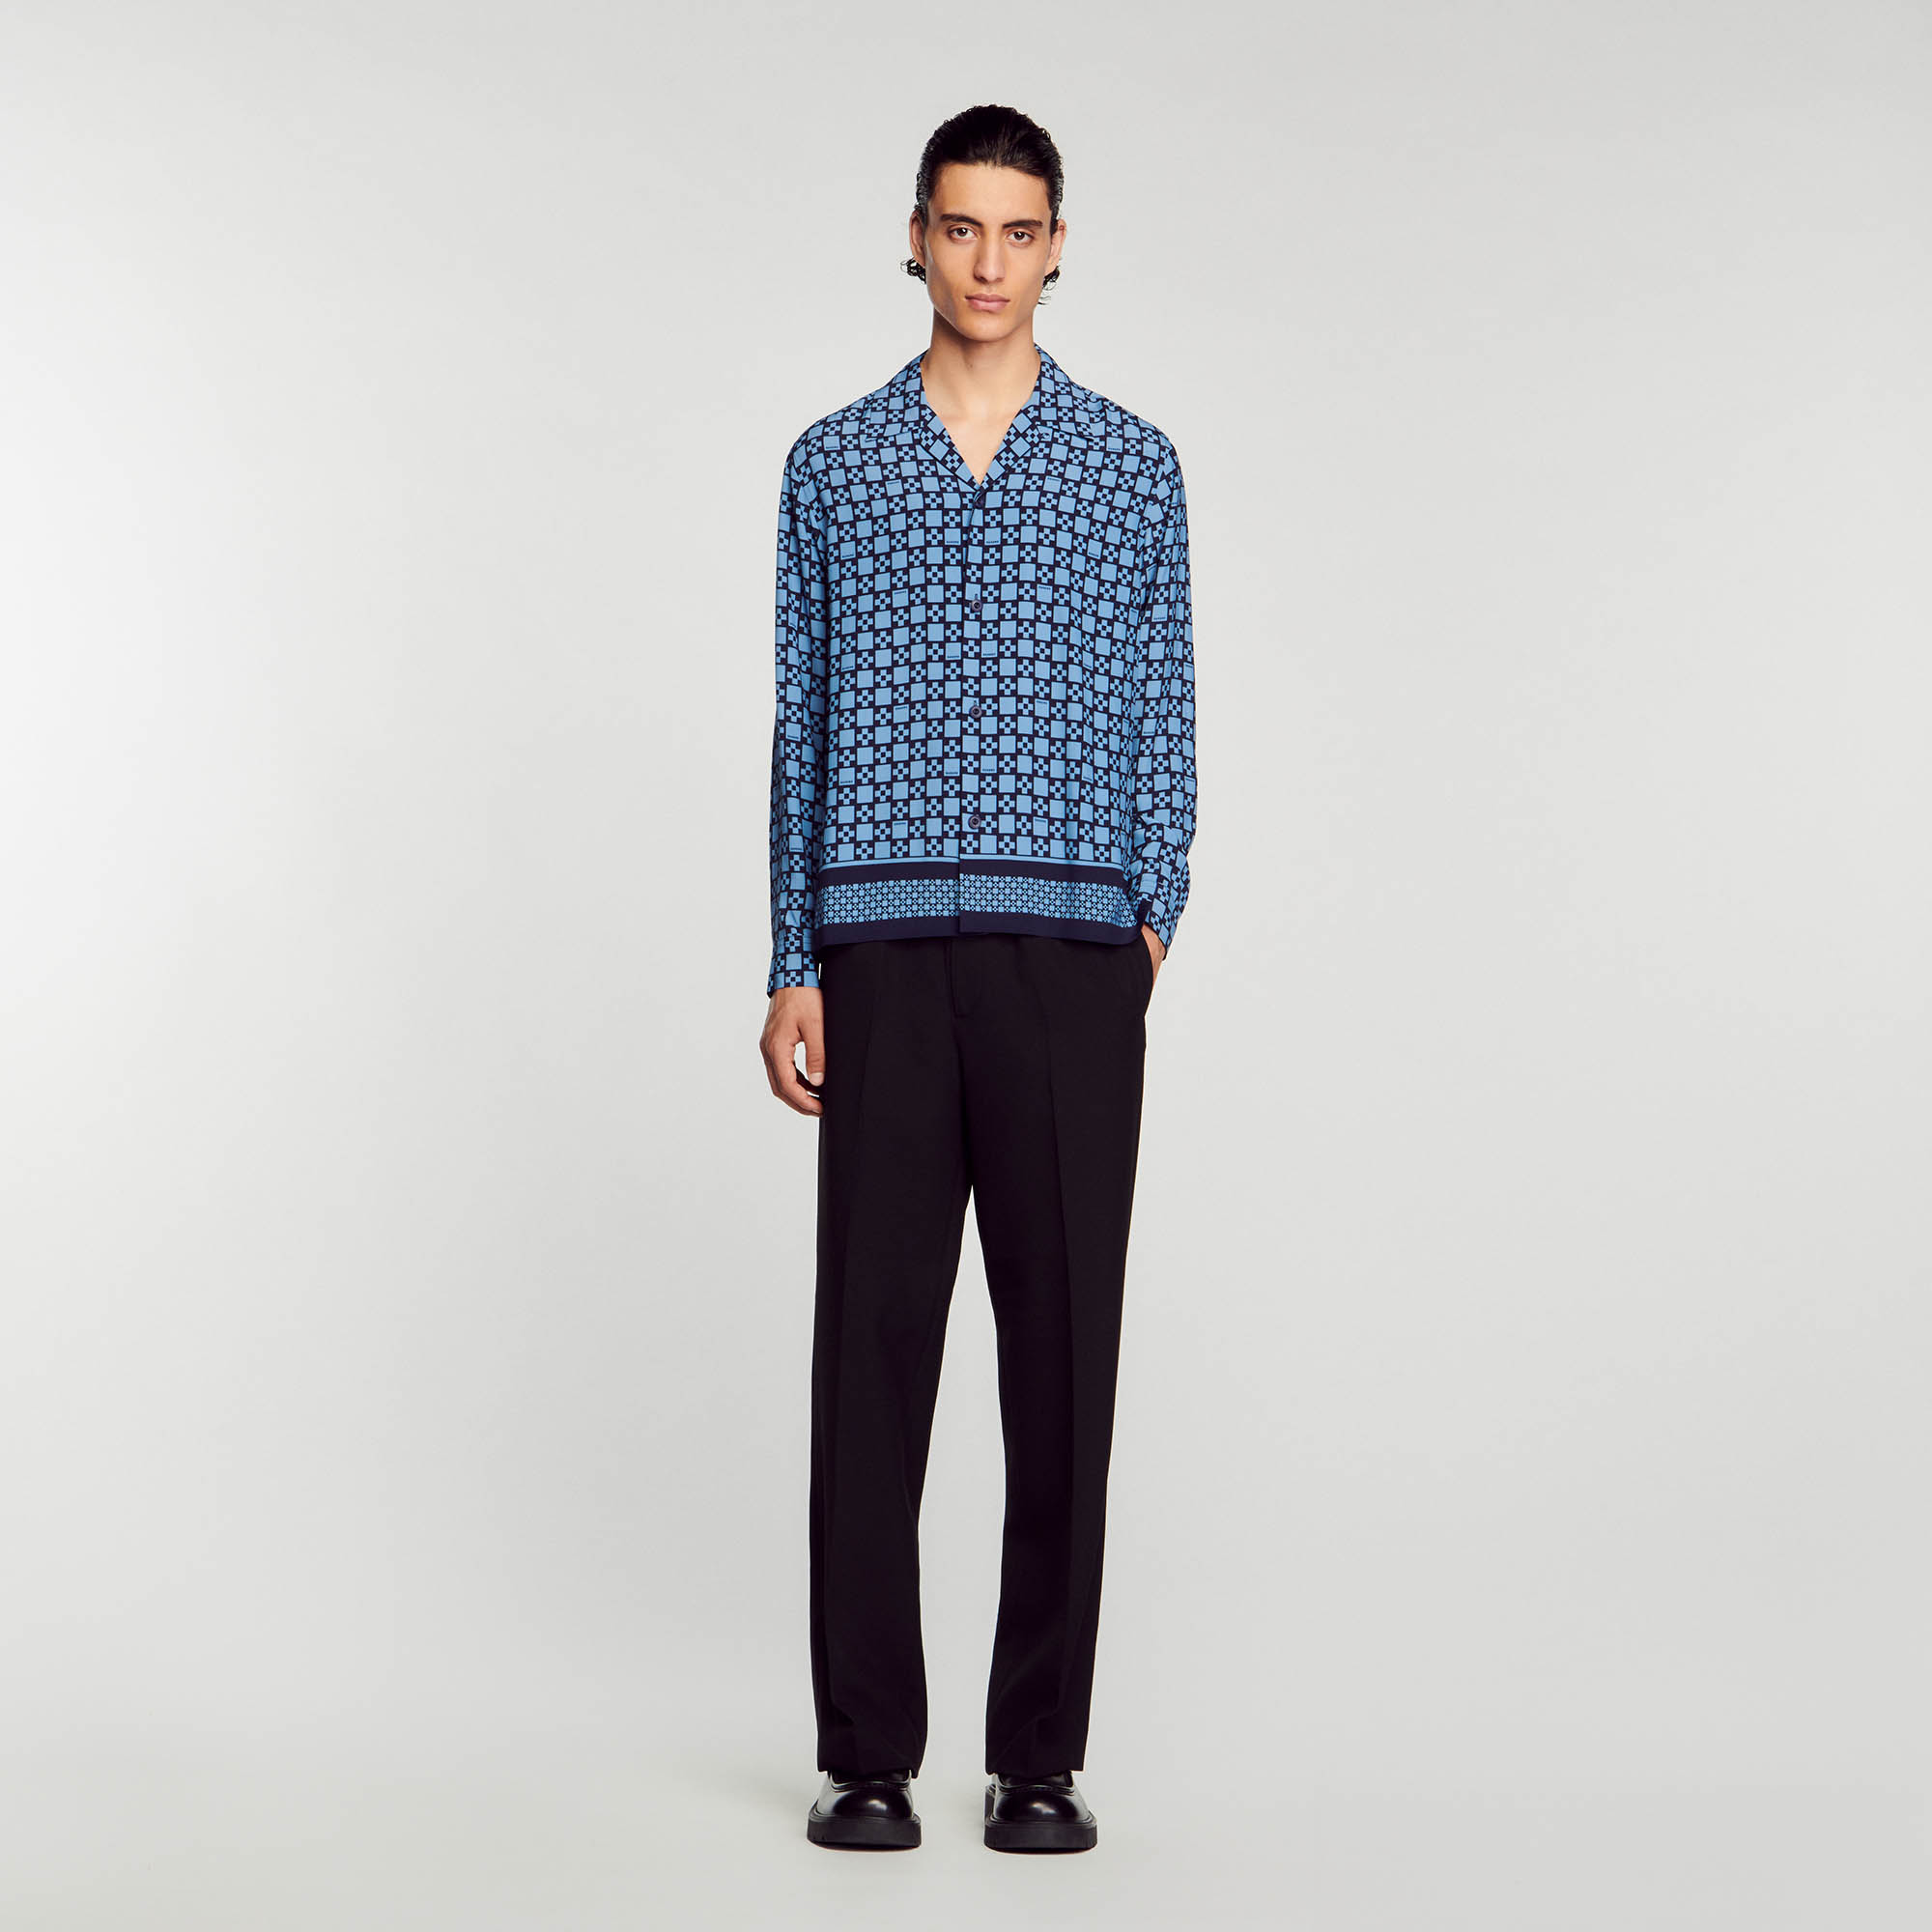 Sandro viscose Flowing button-down shirt with long sleeves, a shark collar, a Square Cross print, and a contrasting stripe on the bottom